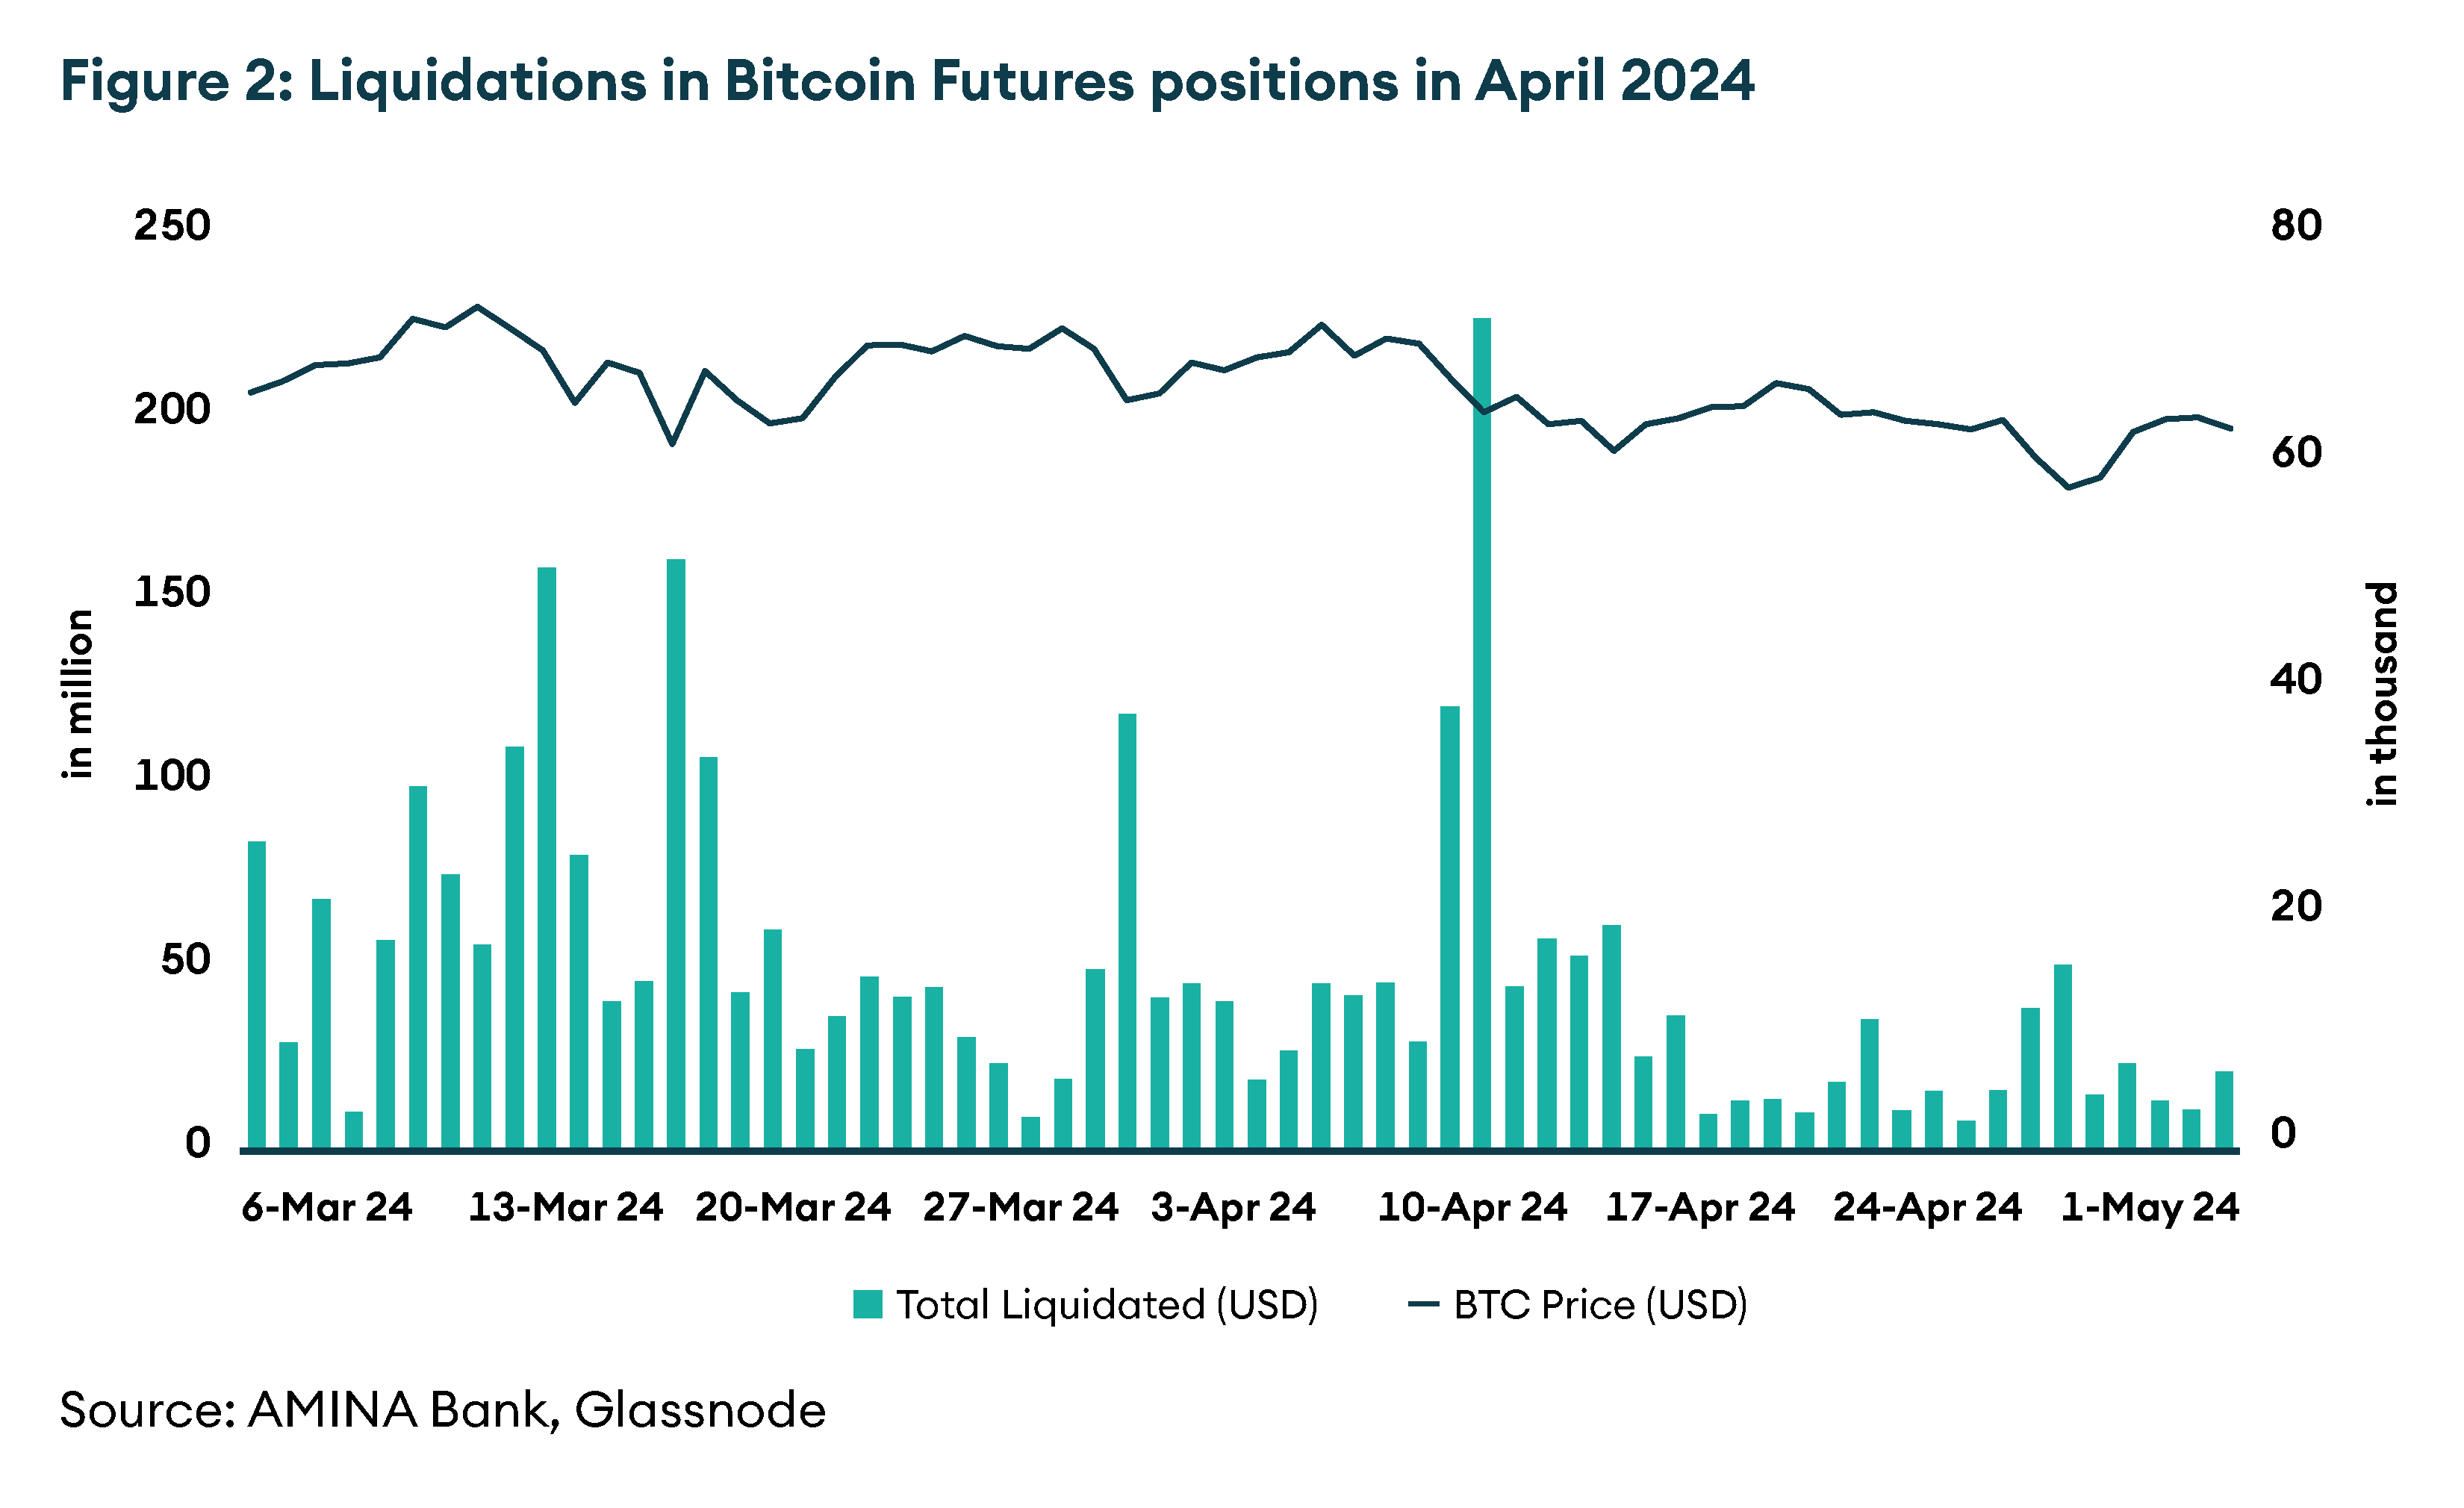 Liquidations in Bitcoin Futures positions in April 2024